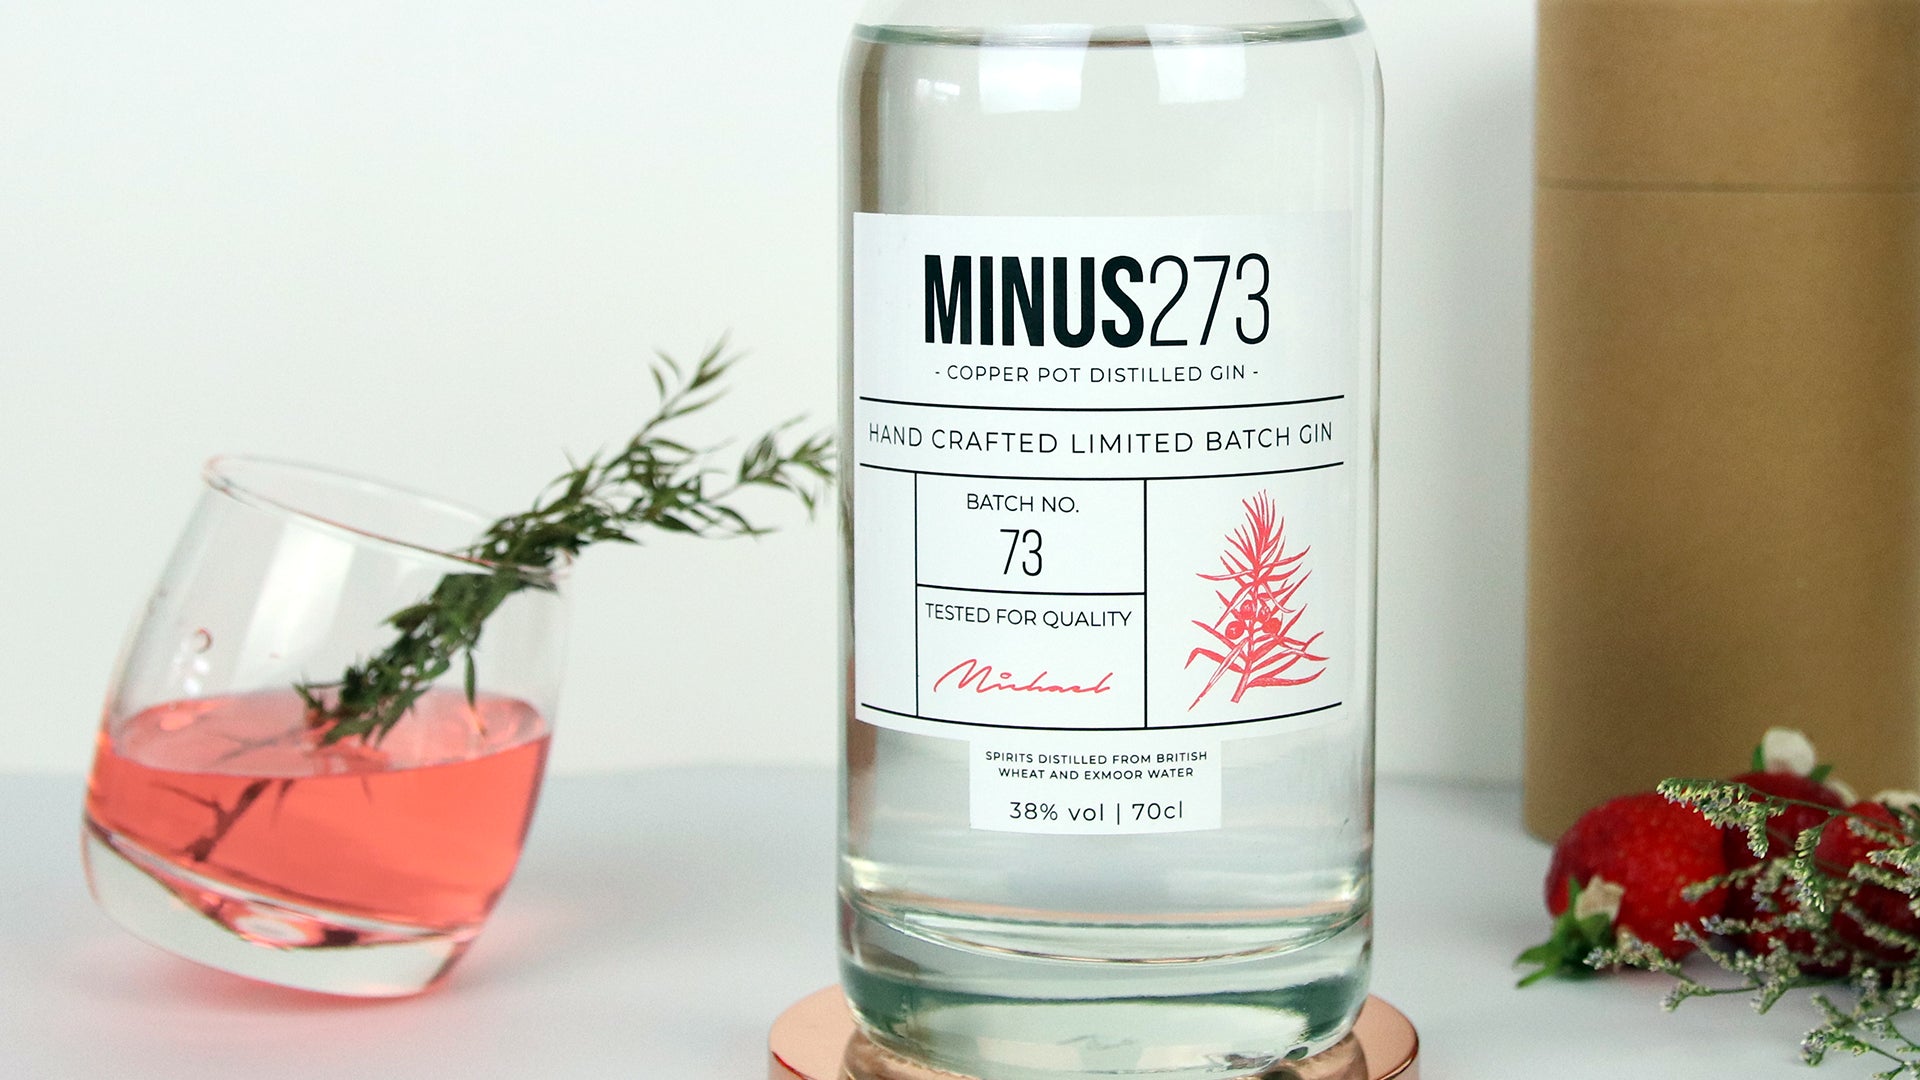 Drinks label applied to glass gin bottle next to a tilted glass filled with a cocktail